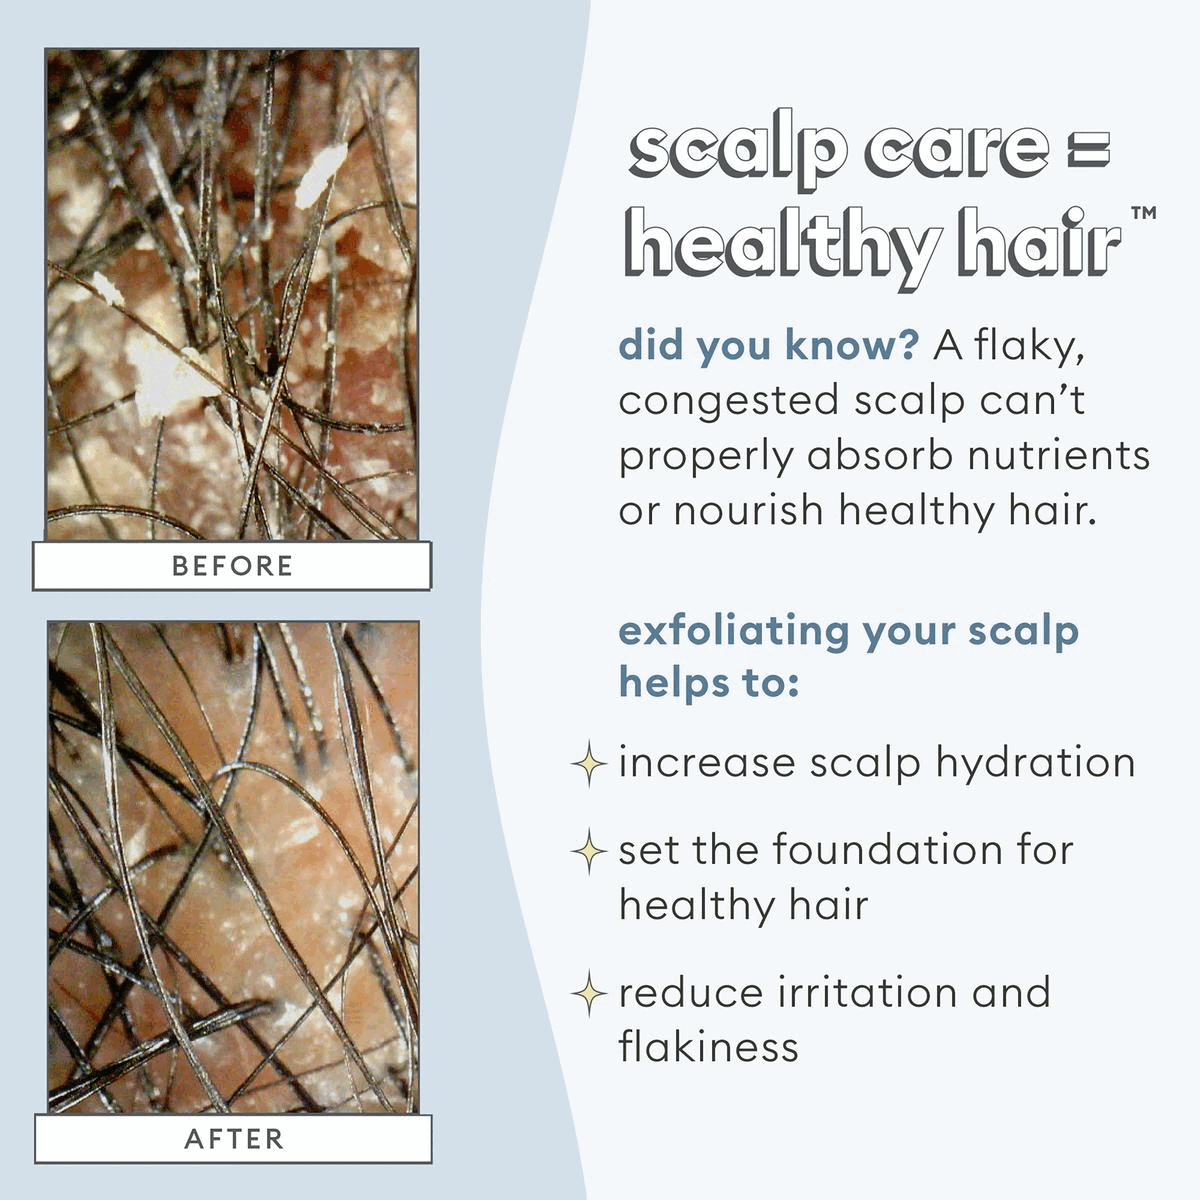 Image 1, scalp care = healthy hair. Image 2, what makes our micro-exfoliators different?. Image 3, double cleanse for your healthiest scalp.